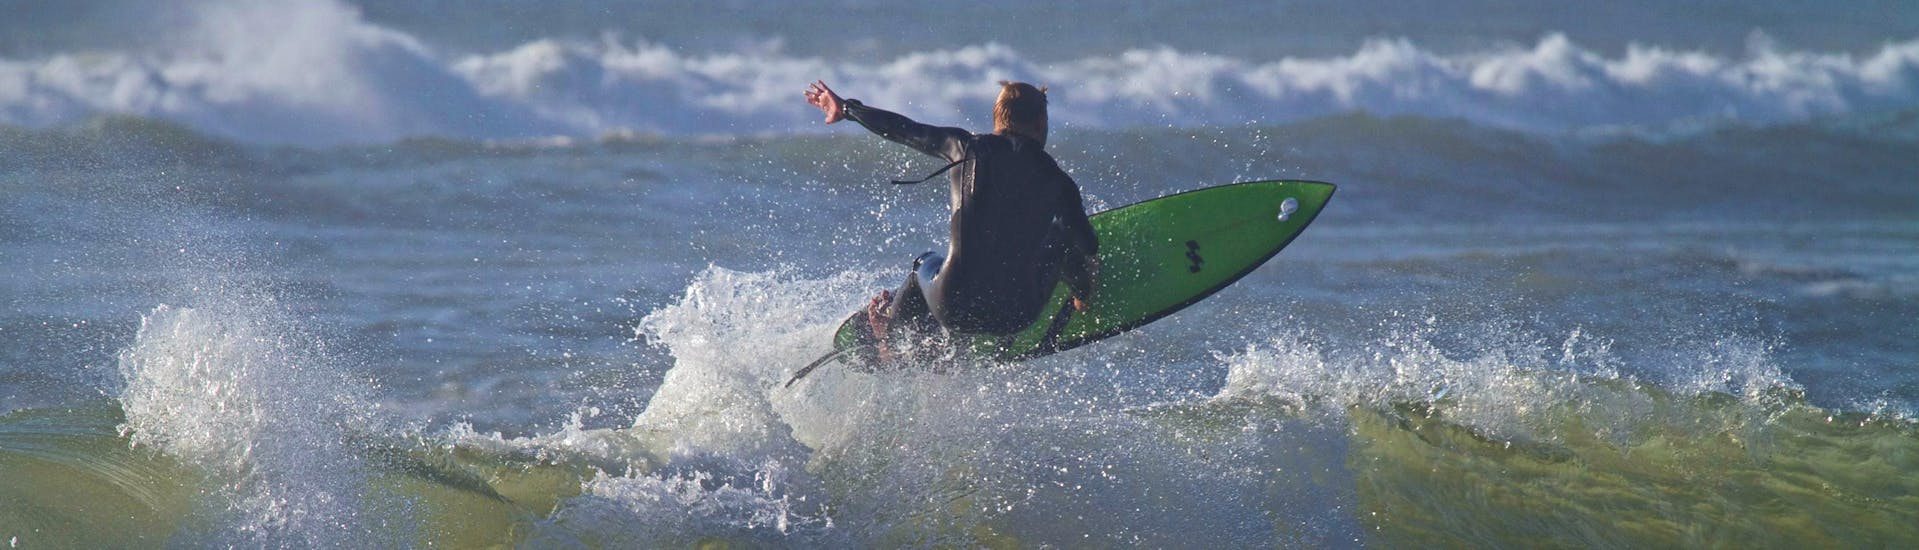 A surfer is riding a wave during his private surfing lessons with Capbreton Surfer School.